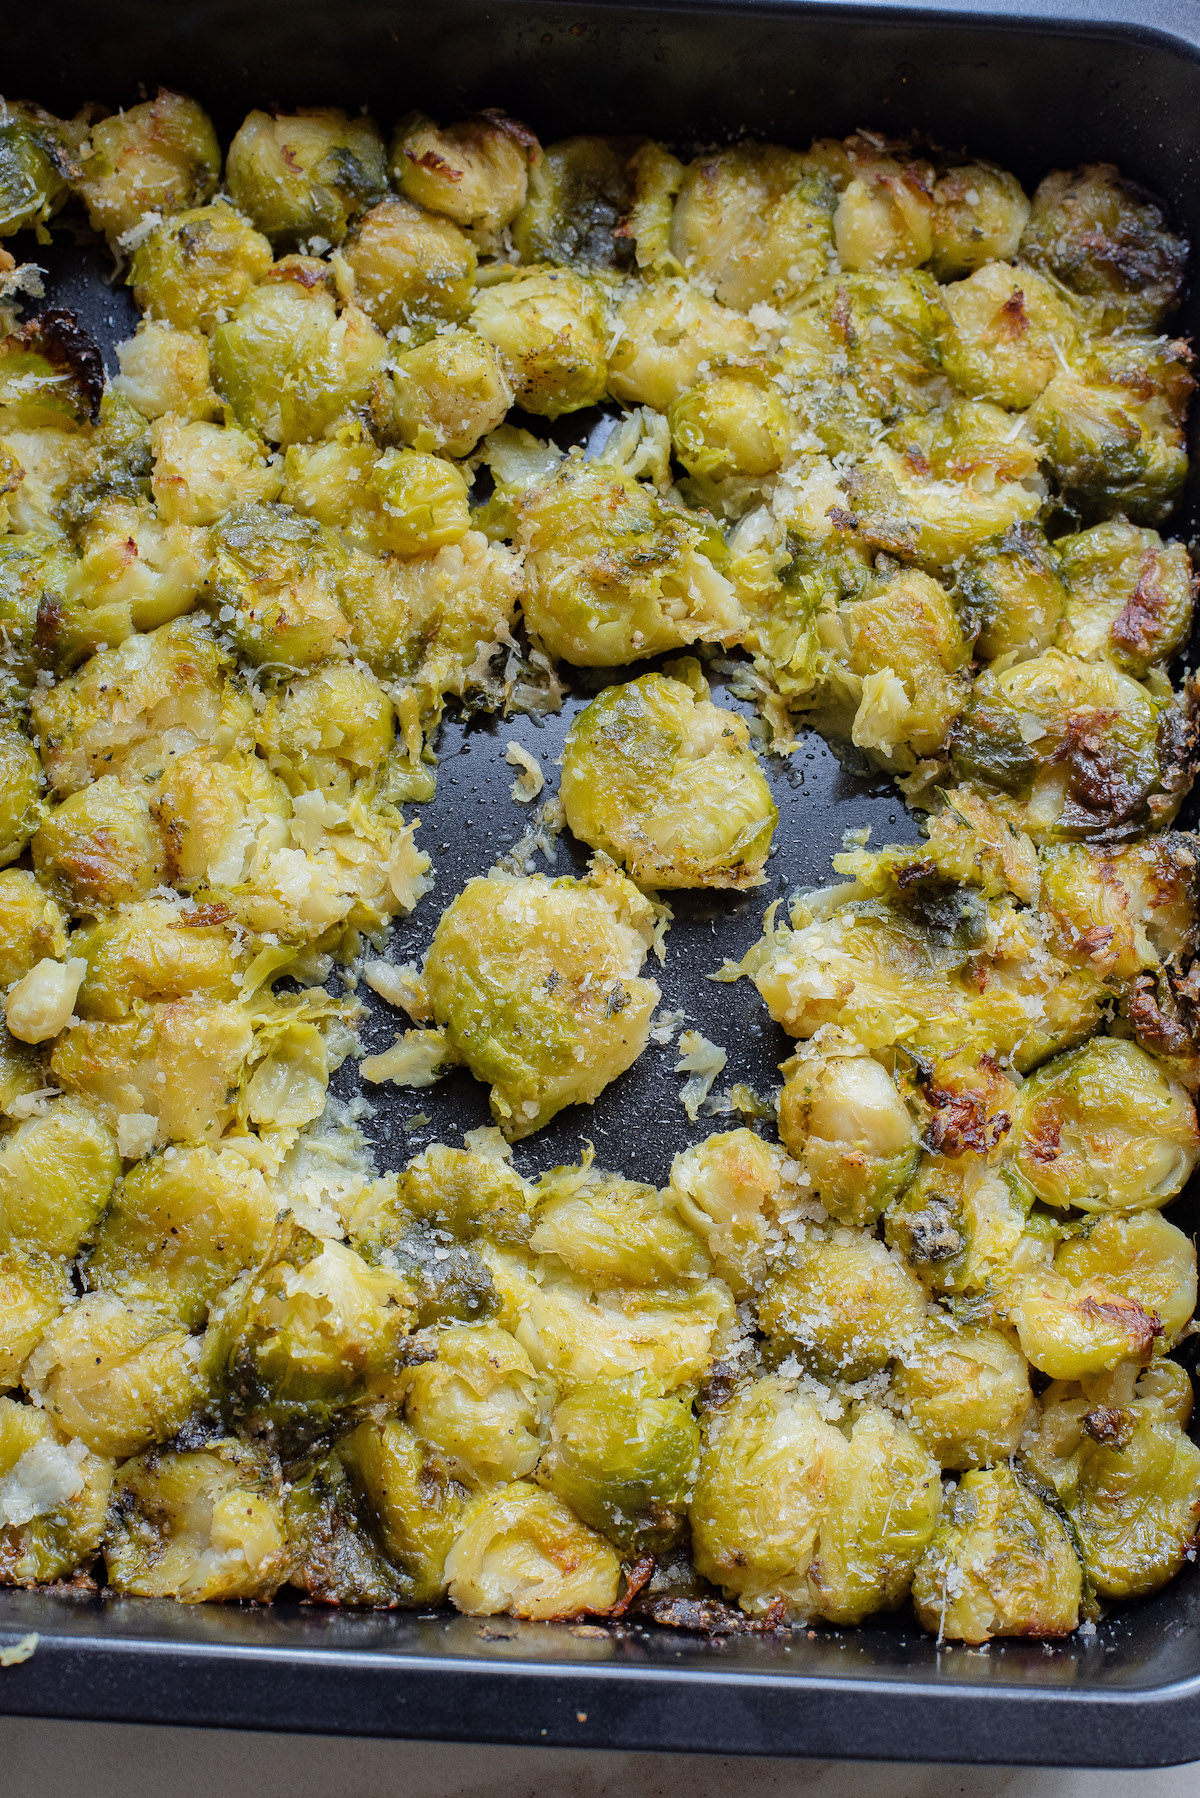 the finished smashed brussel sprouts recipe